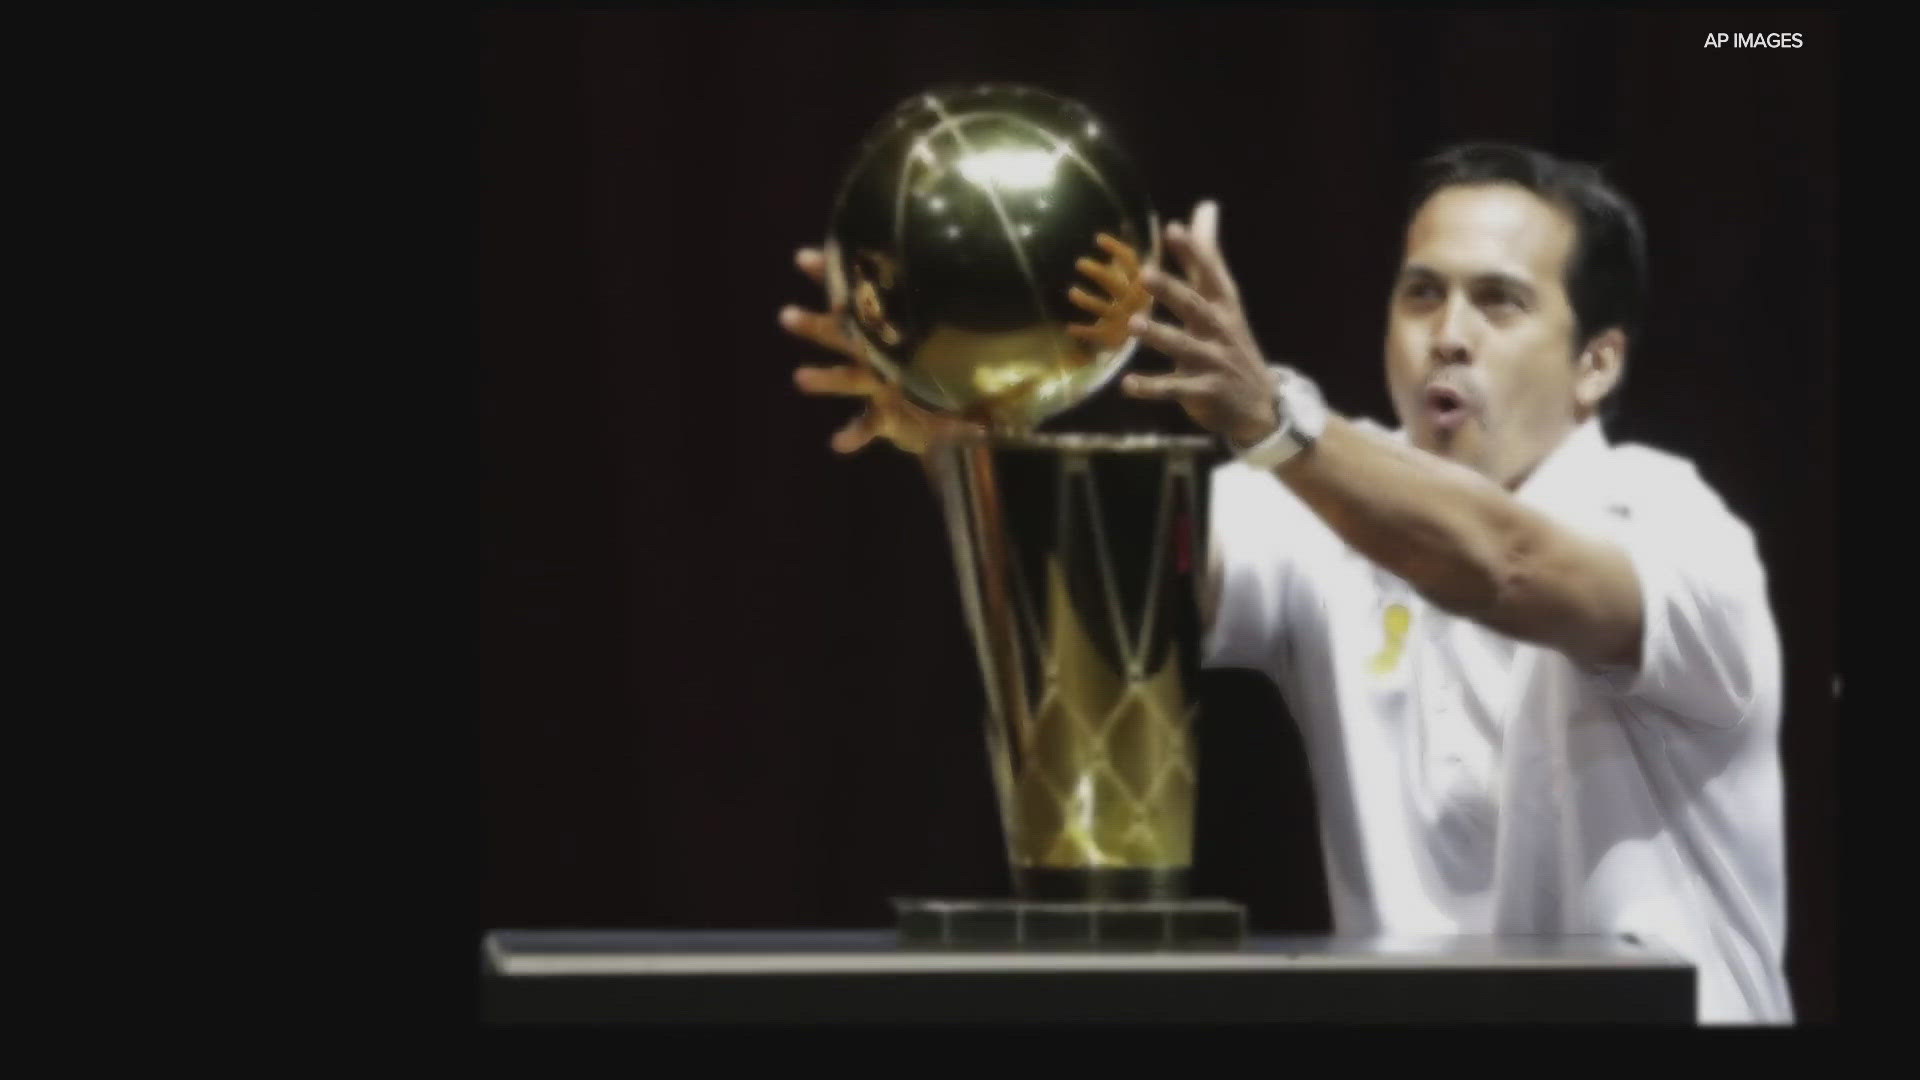 Erik Spoelstra grew up in Portland and a Jesuit High School Athletic Hall of Fame inductee. He's the first Asian-American head coach in any major US sports league.